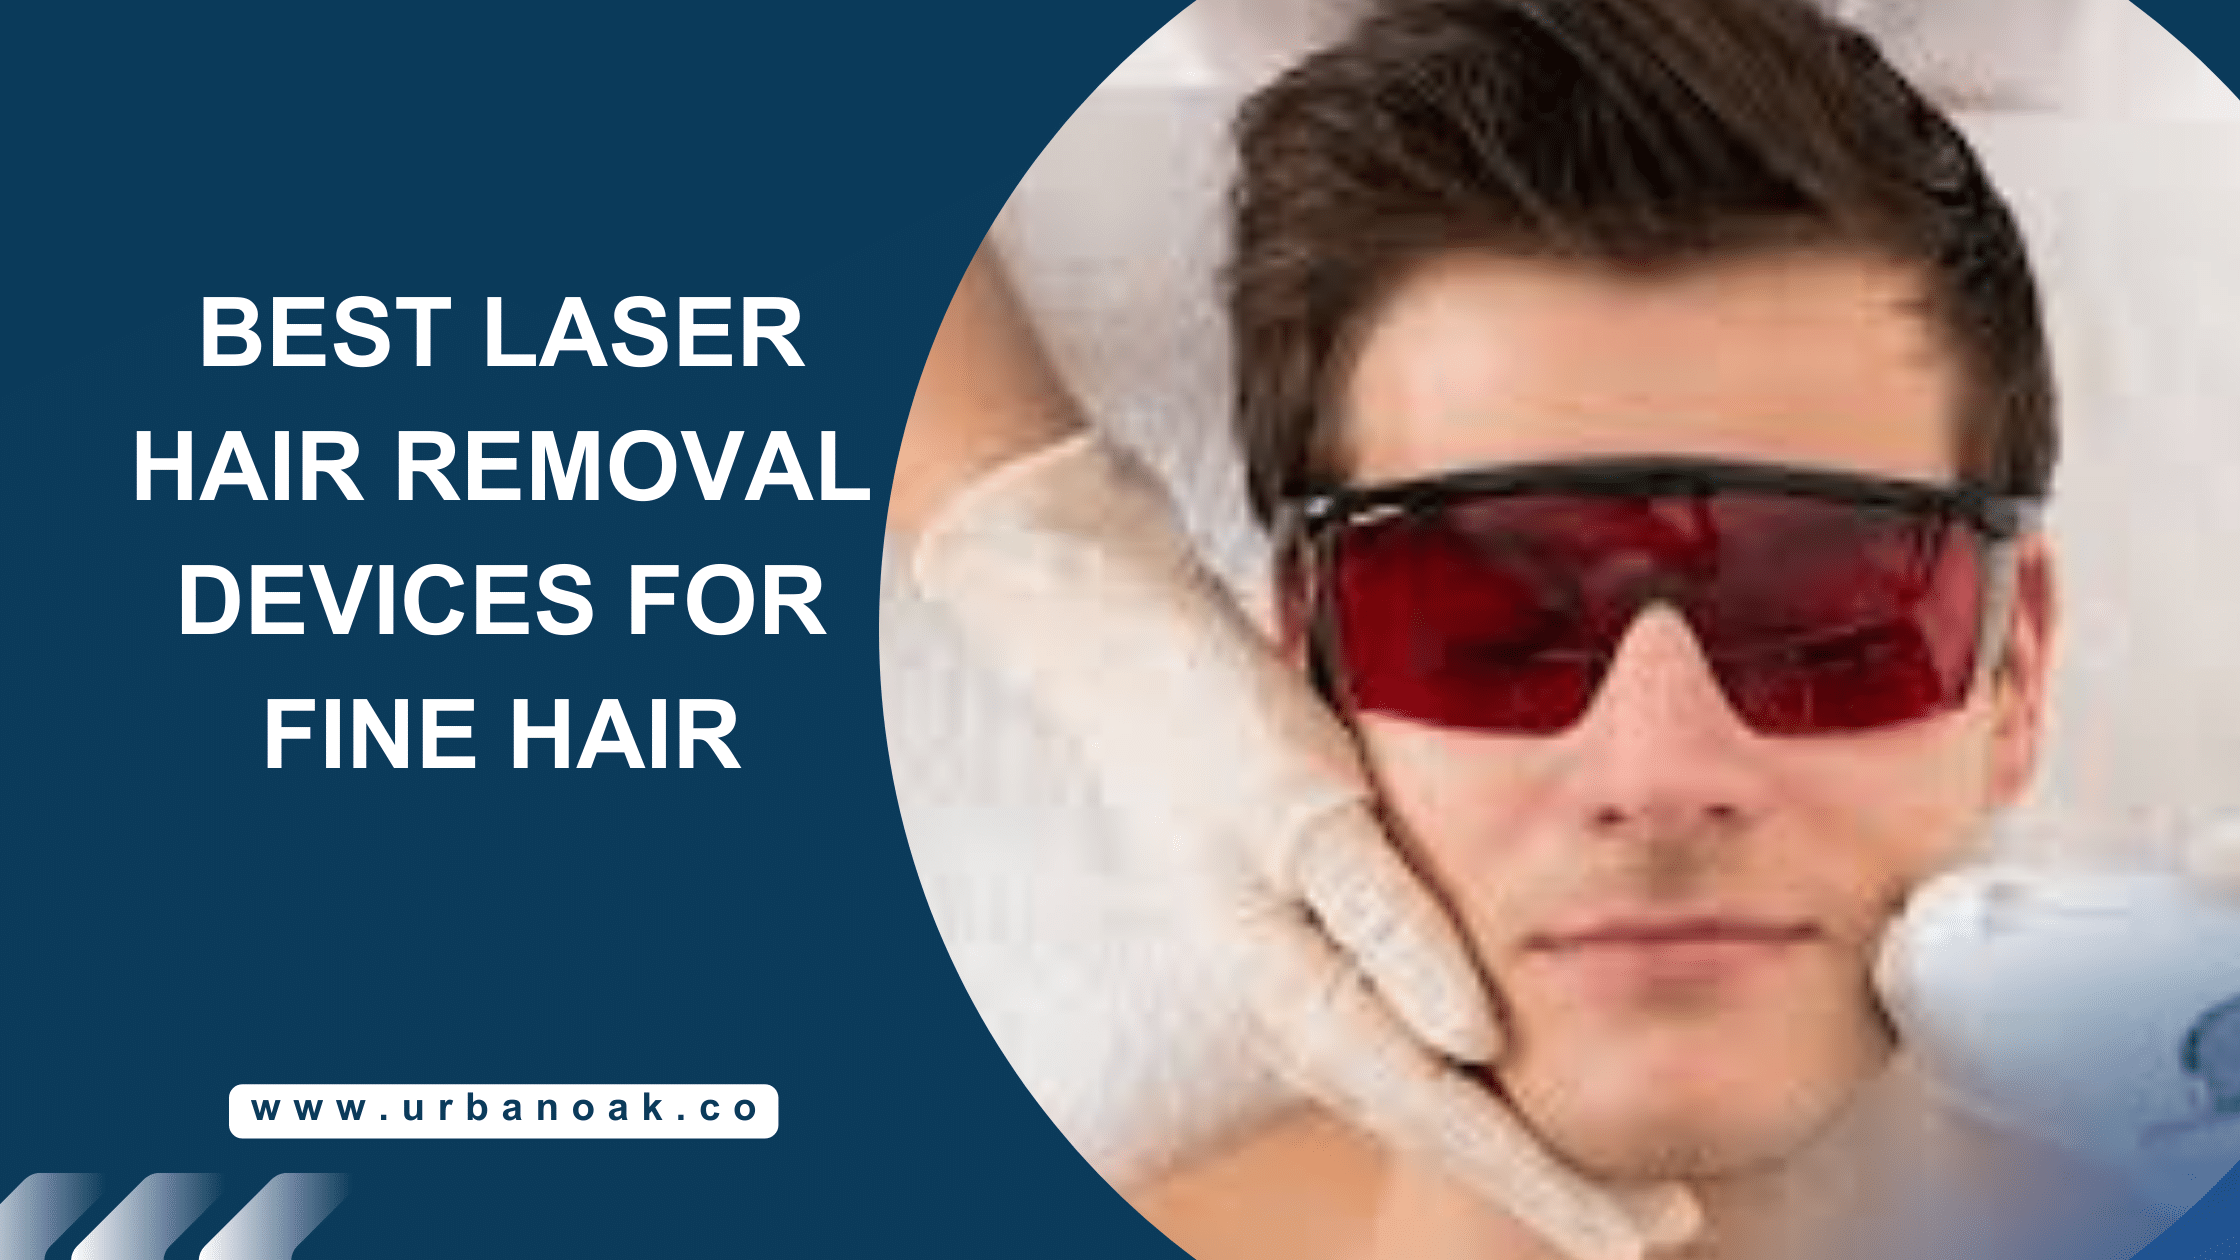 Best Laser Hair Removal Devices For Fine Hair